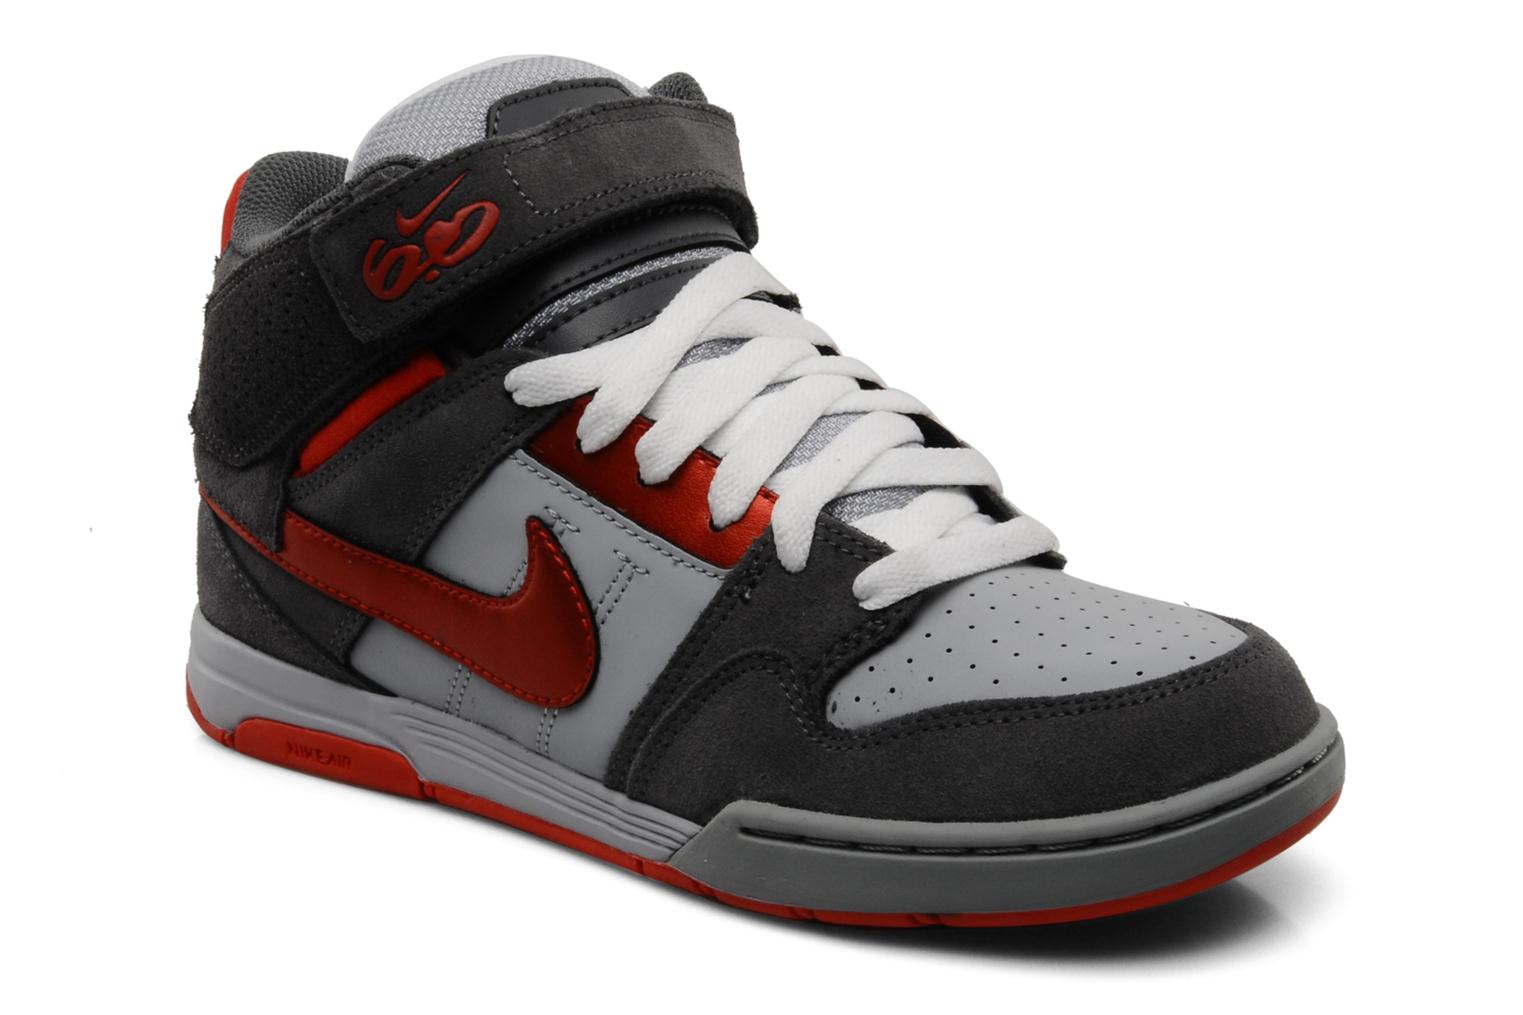 Nike 6.0 Wmns air mogan mid 2 Sport shoes in Grey at